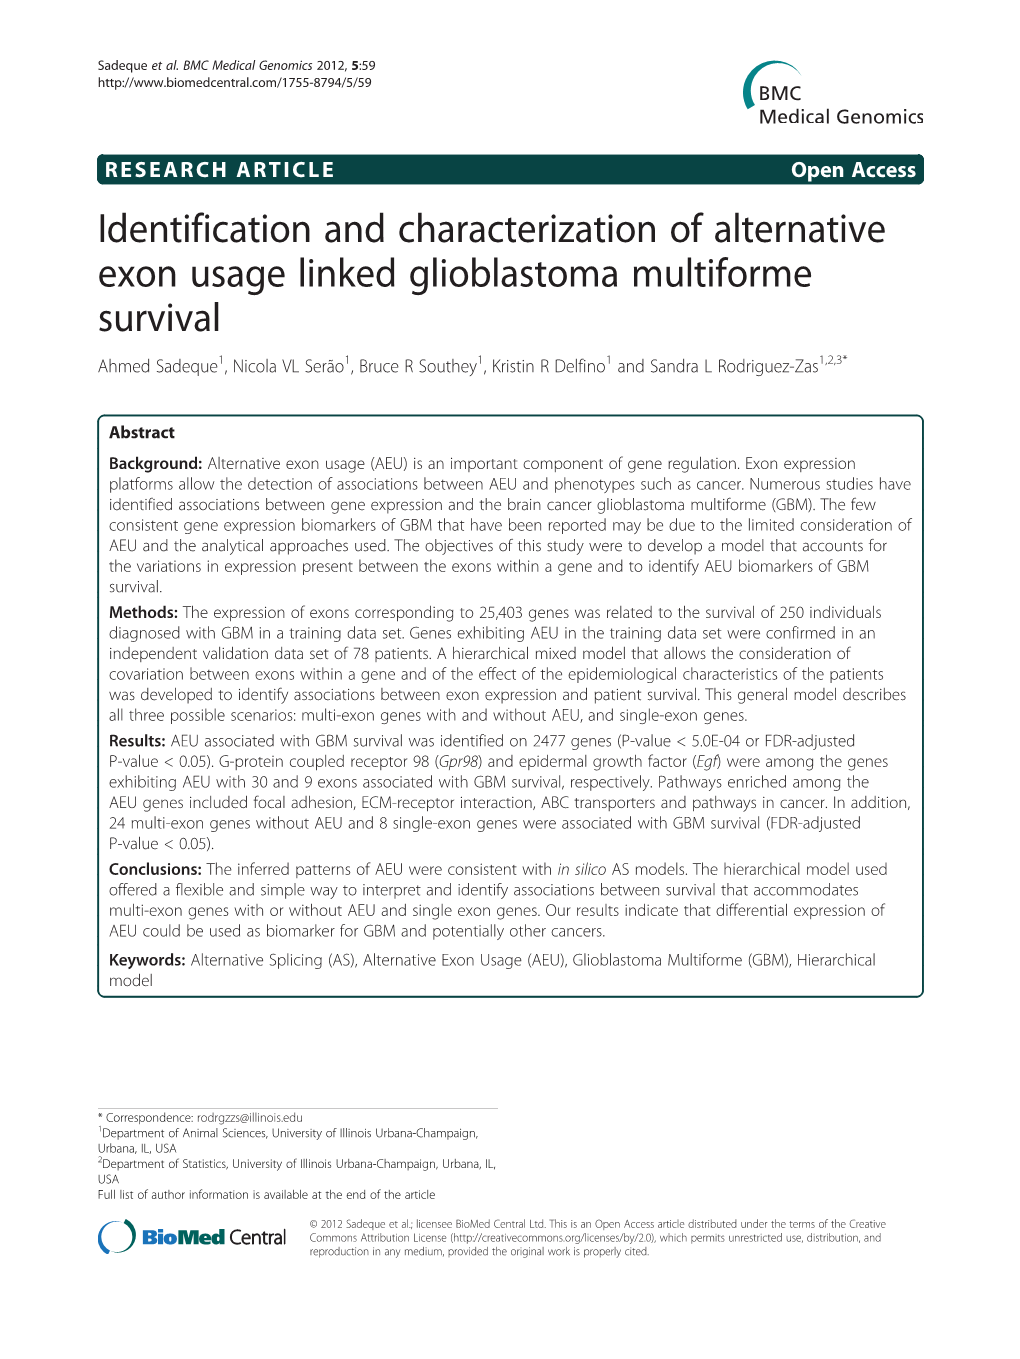 Identification and Characterization Of